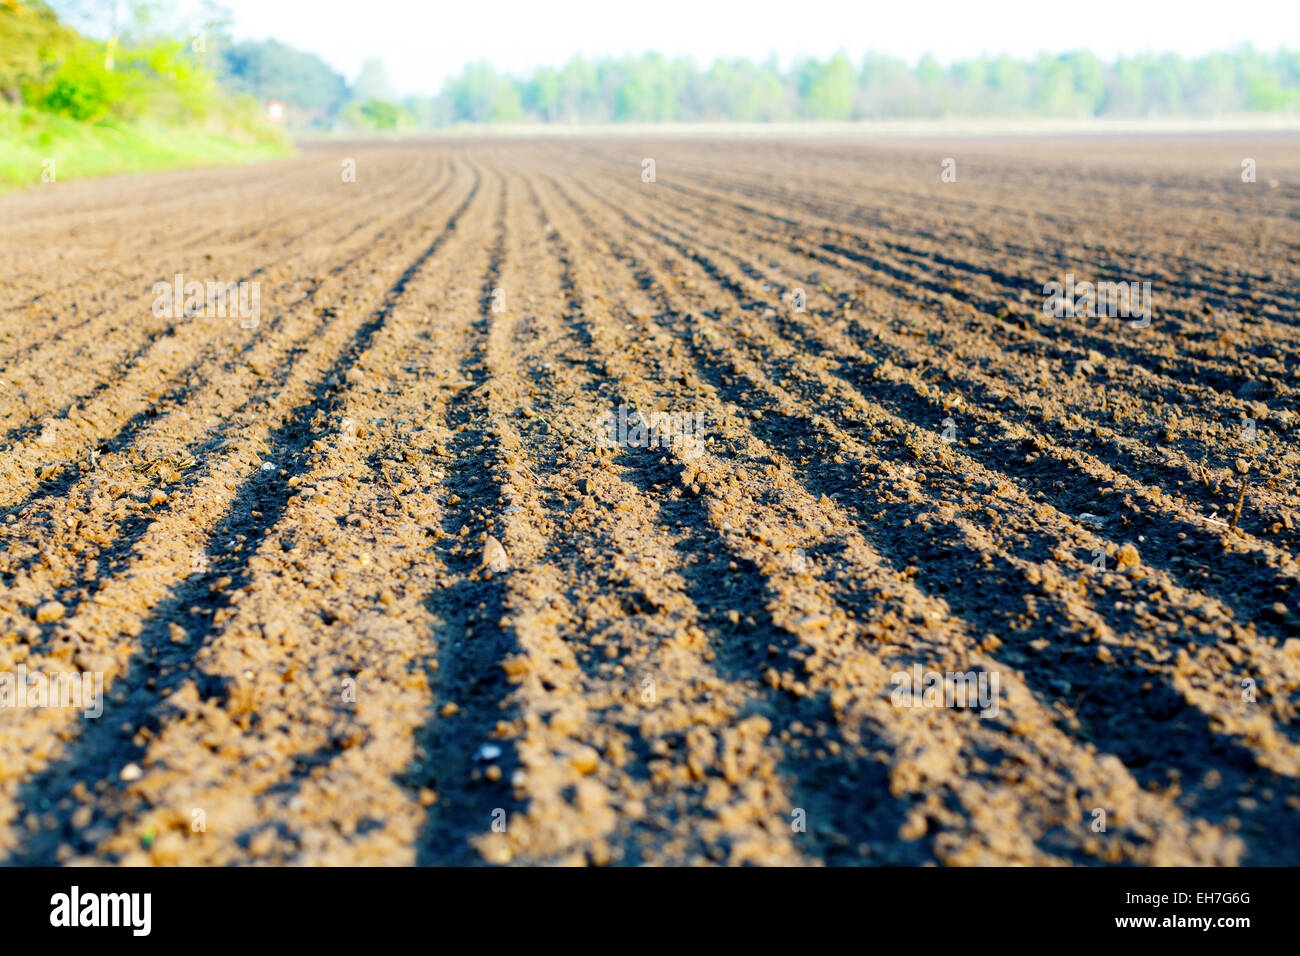 Freshly ploughed field Stock Photo